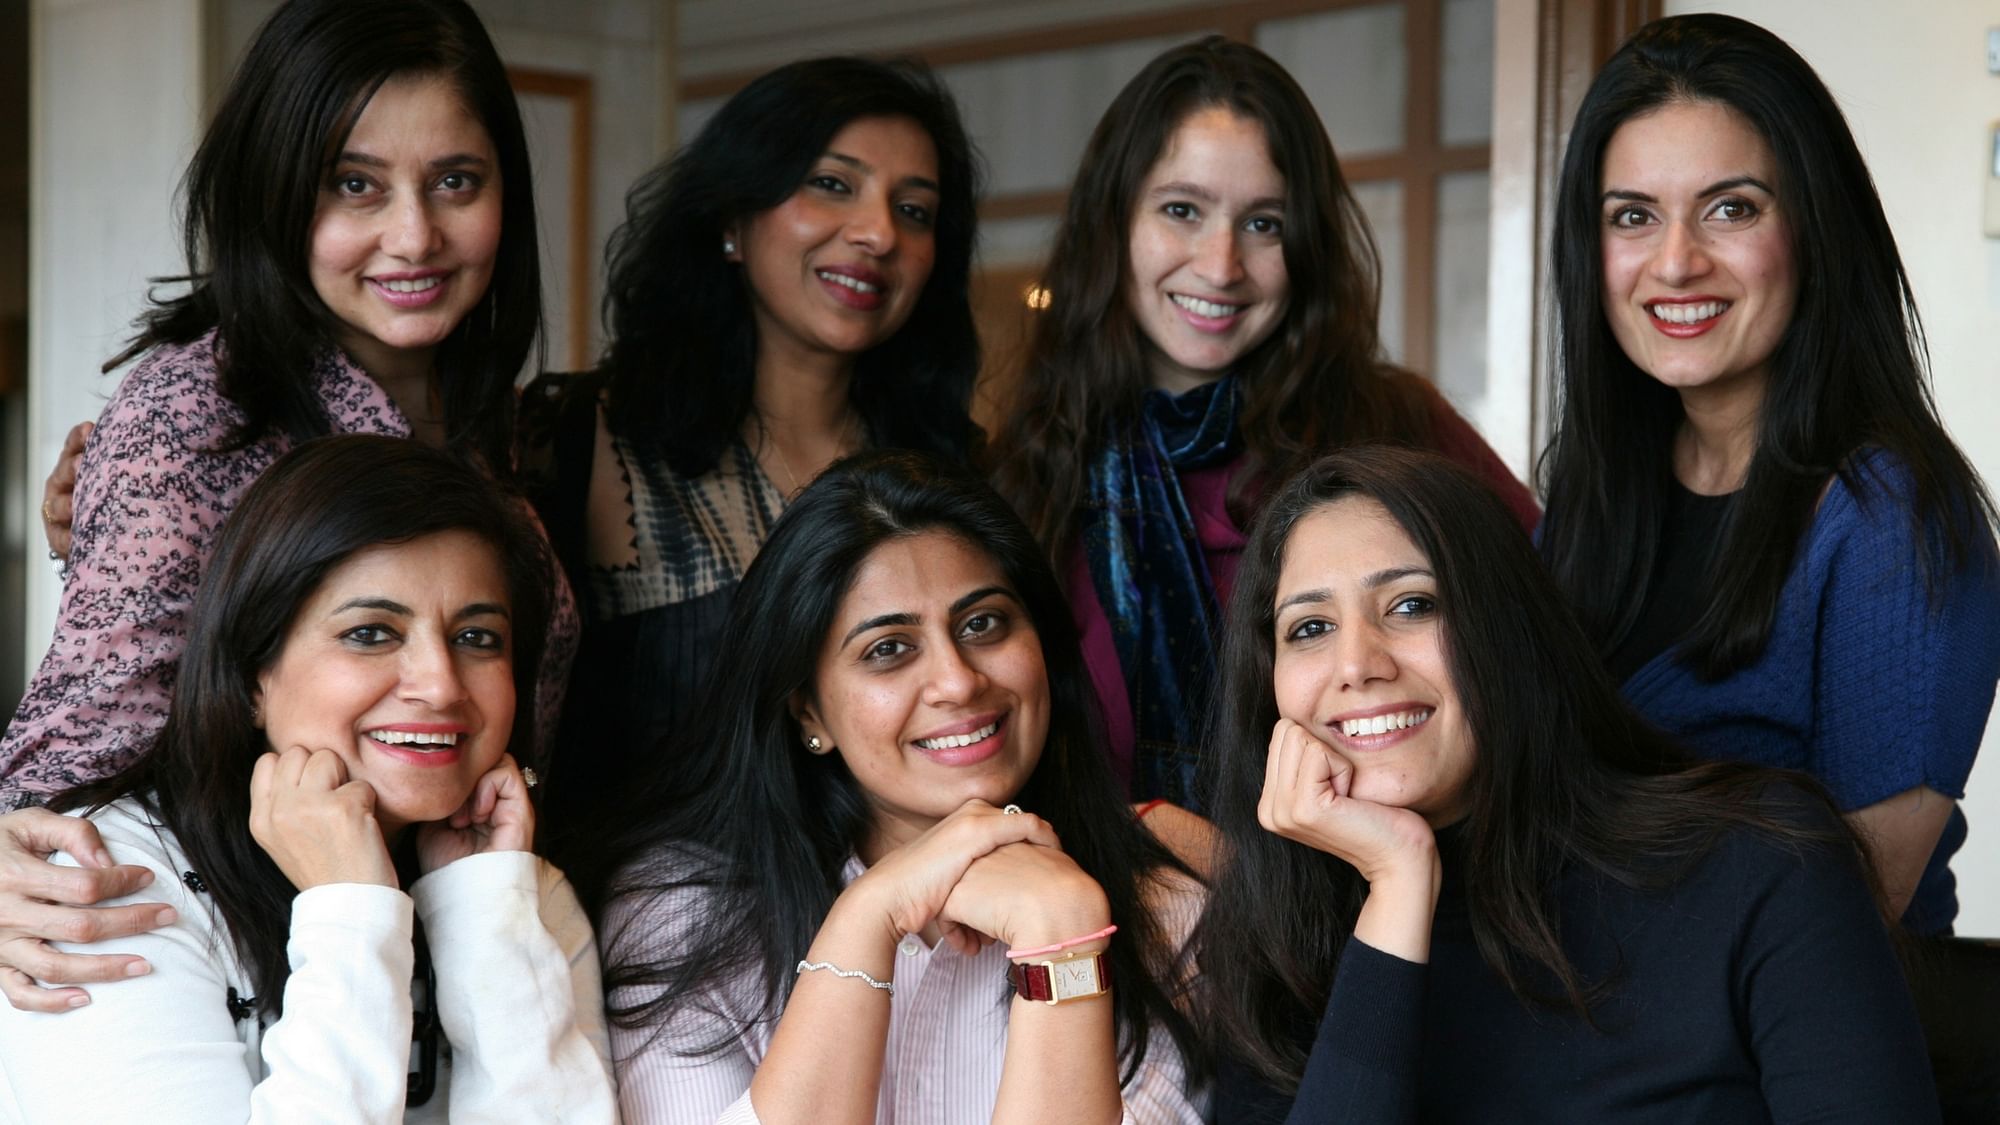 The Whole Kahani was set up “to give a new voice to old stories and increase the visibility of South Asian writers in Britain.” (Photo Courtesy: <a href="http://thewholekahani.weebly.com/members.html">The Whole Kahani</a>)